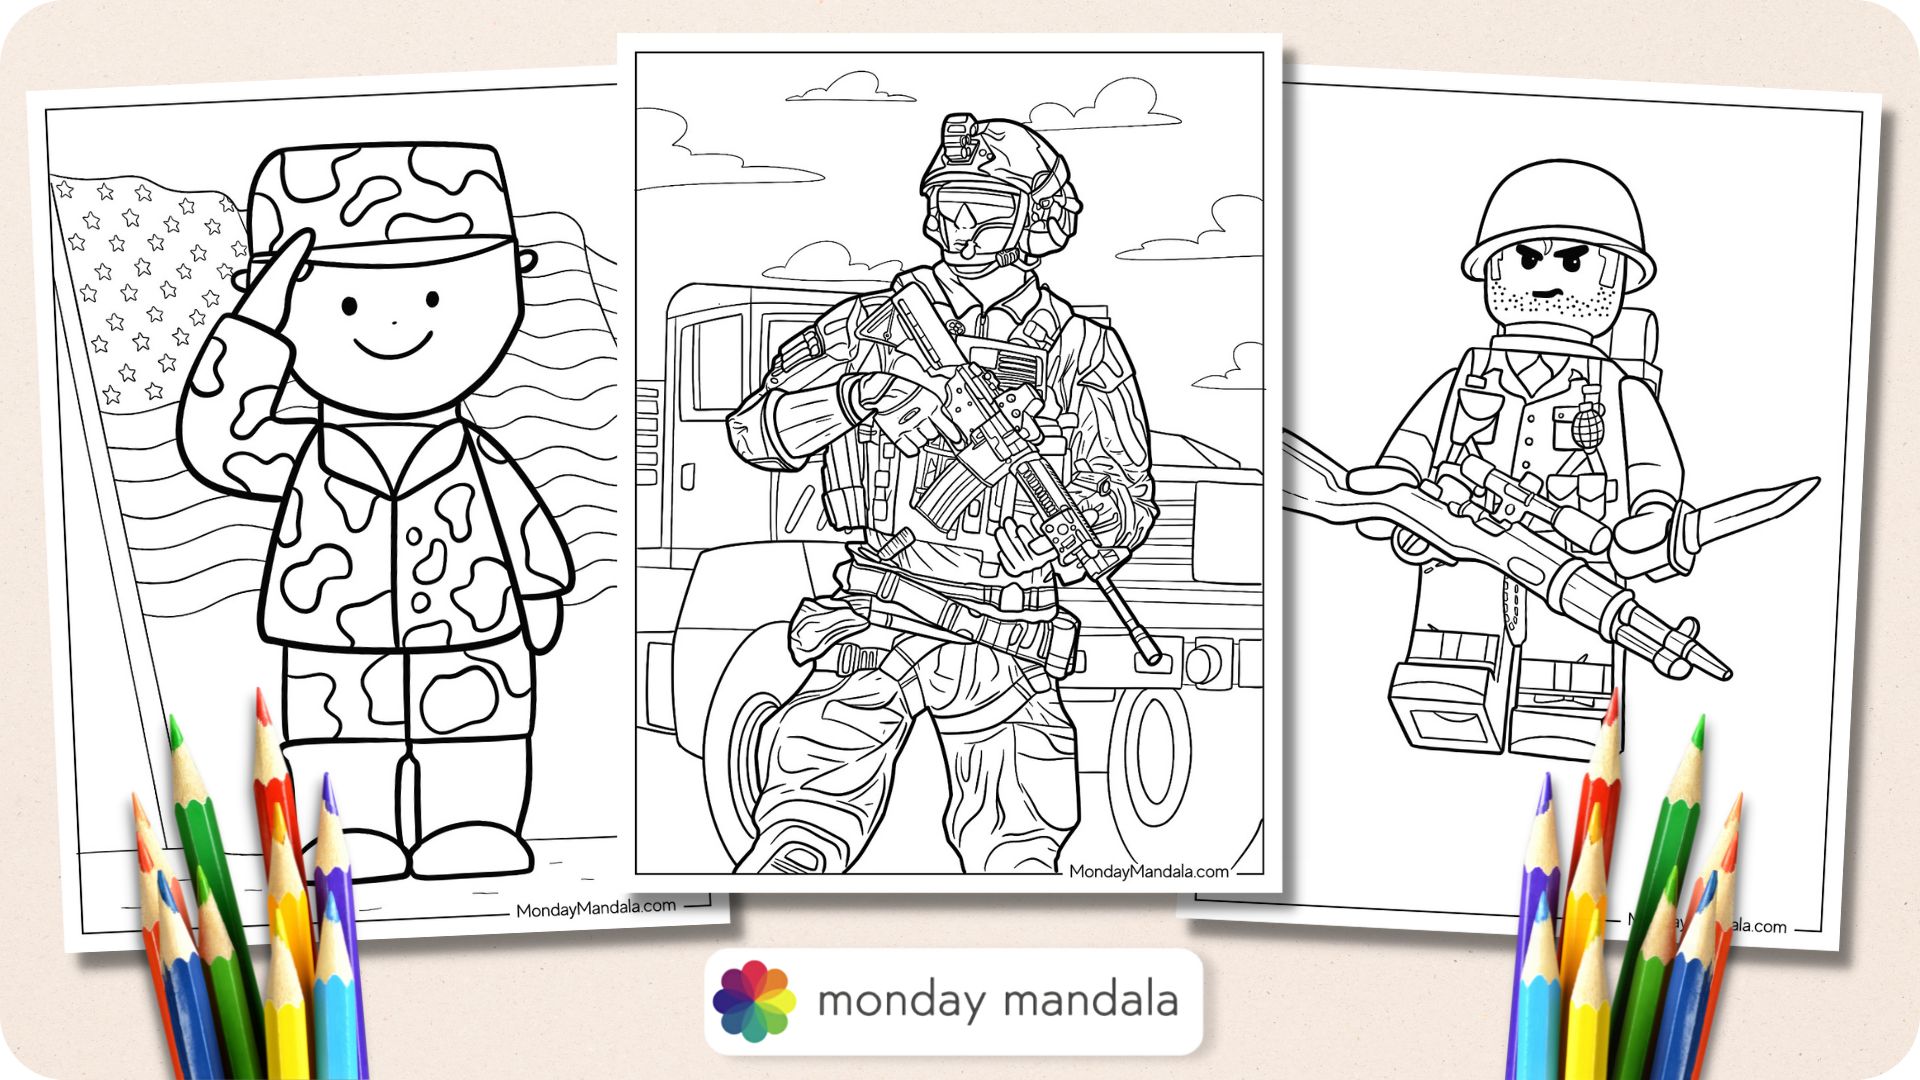 Soldier coloring pages free pdf printables